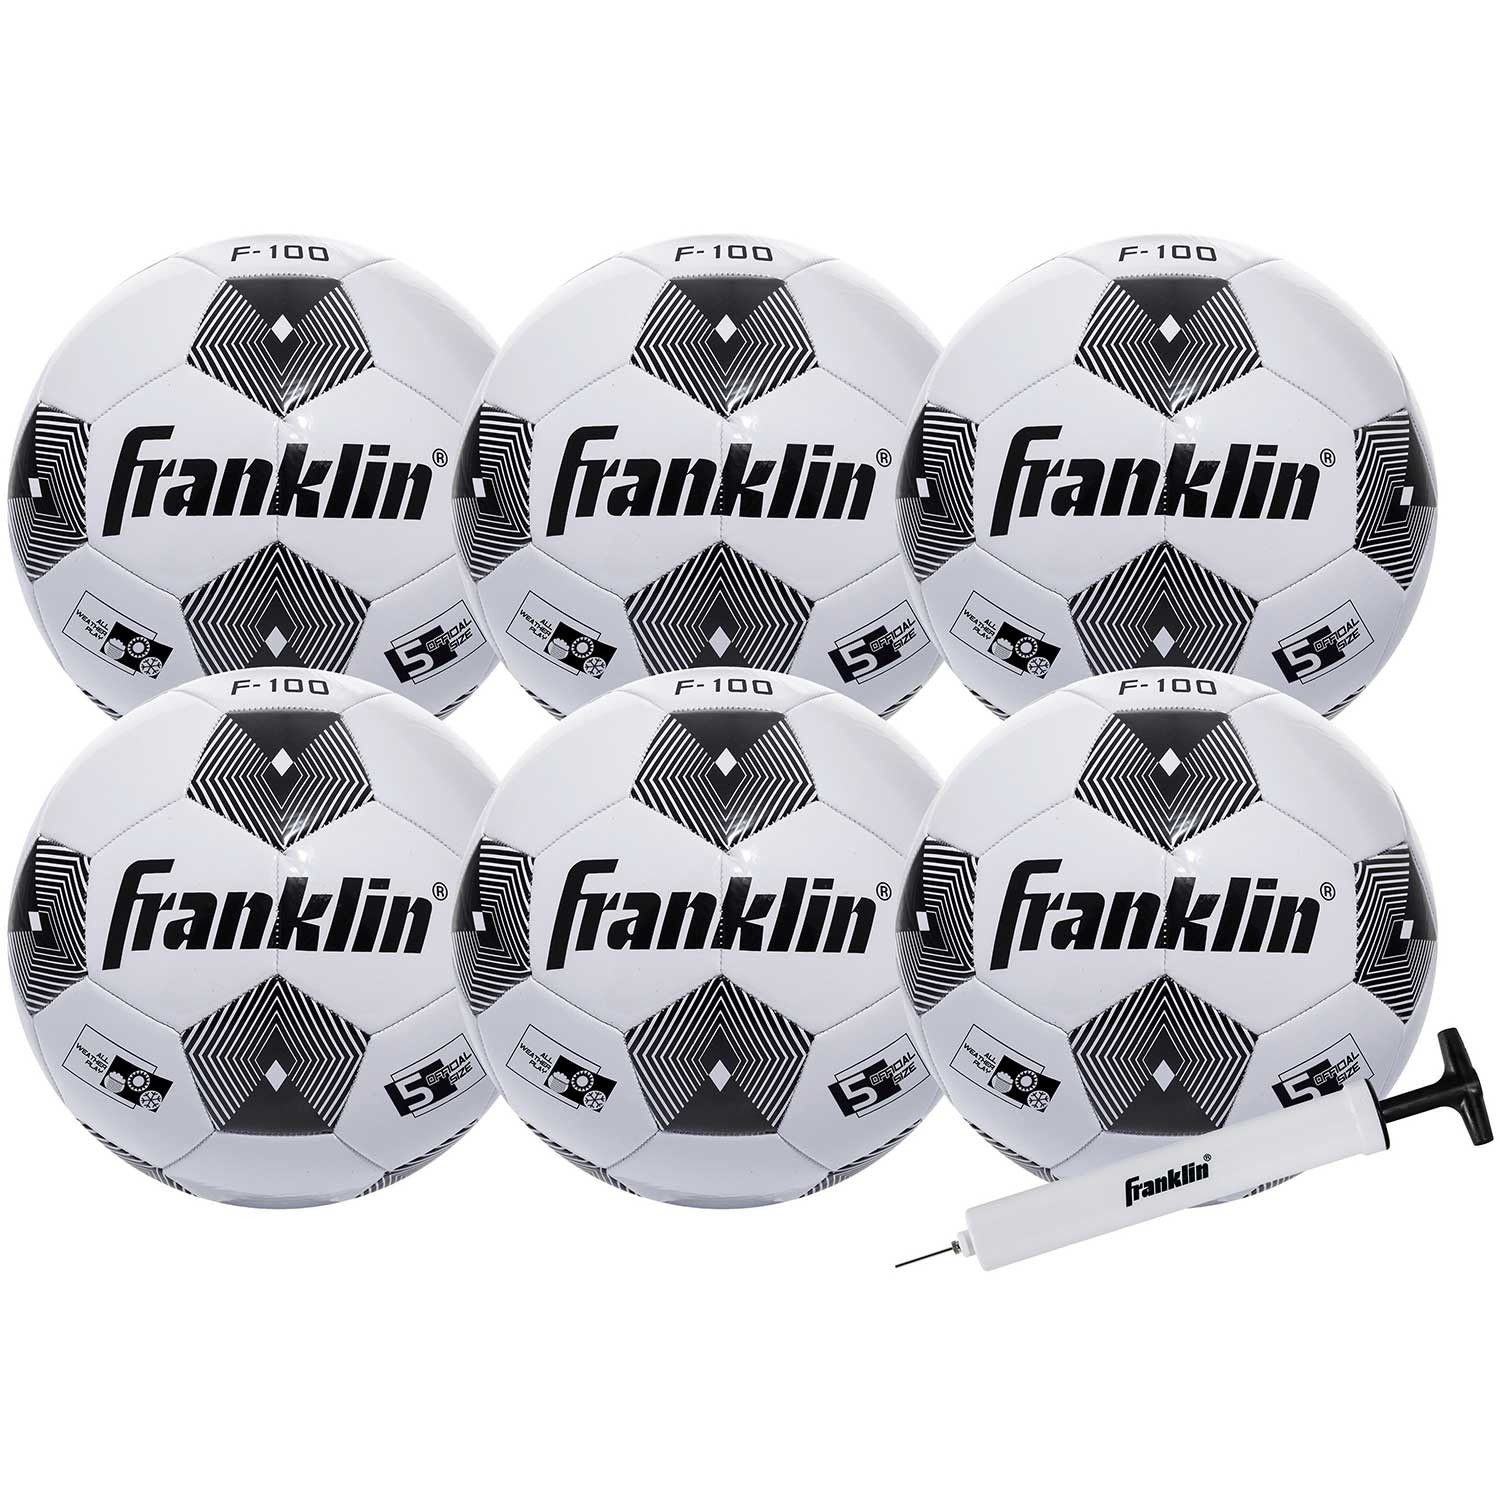 S5 Competition 100 Soccer Ball by Franklin for sale online 